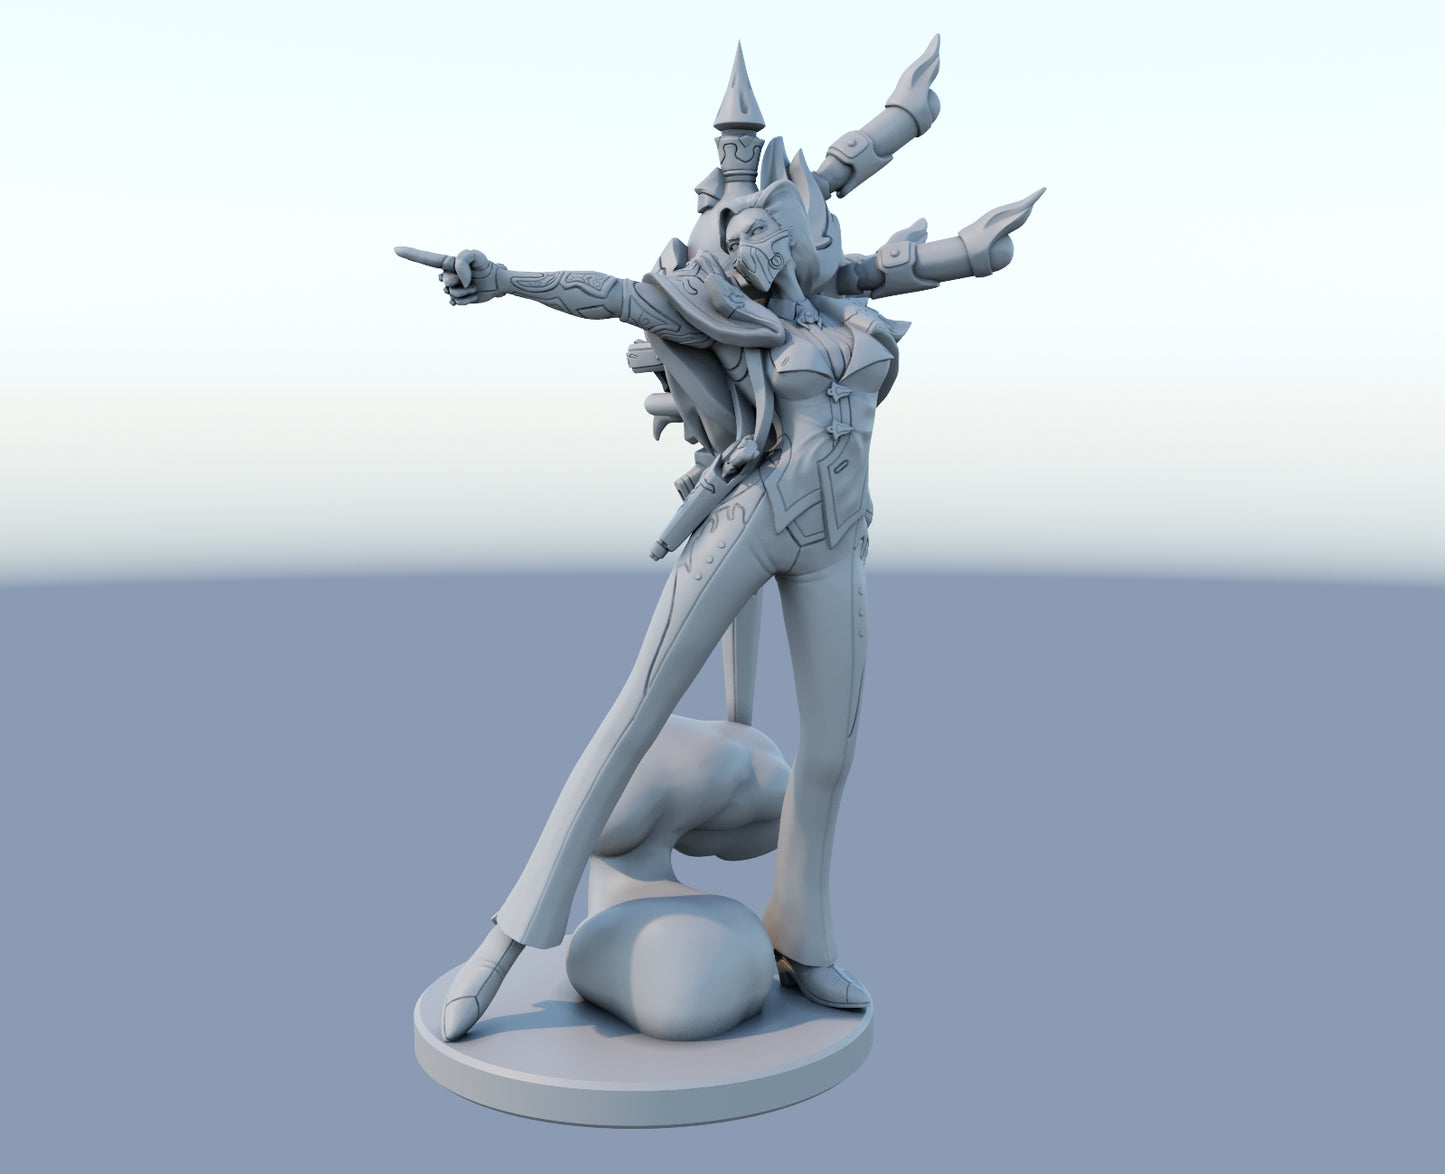 Renata Glasc 3D-printed League of Legends champion figure. Decorate your gaming setup or home with your favorite League of Legends champion! Choose between the unpainted version, perfect for you to paint yourself, or the hand-painted version by a professional painter. Order your figure today!